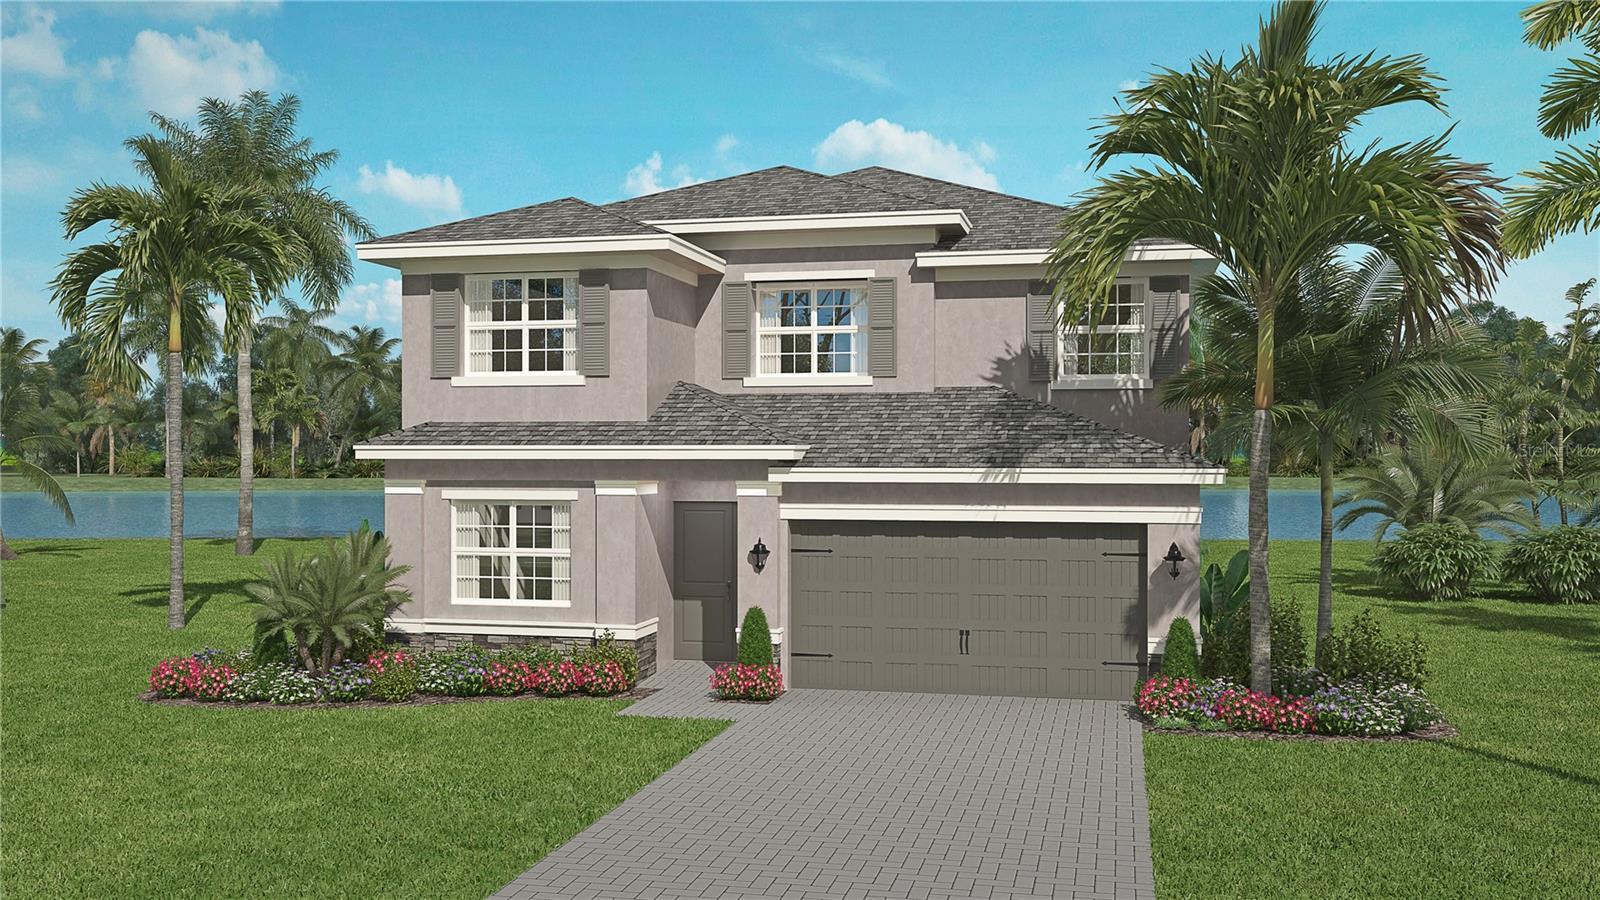 Photo one of 32271 Mahogany Valley Dr Wesley Chapel FL 33543 | MLS T3497323